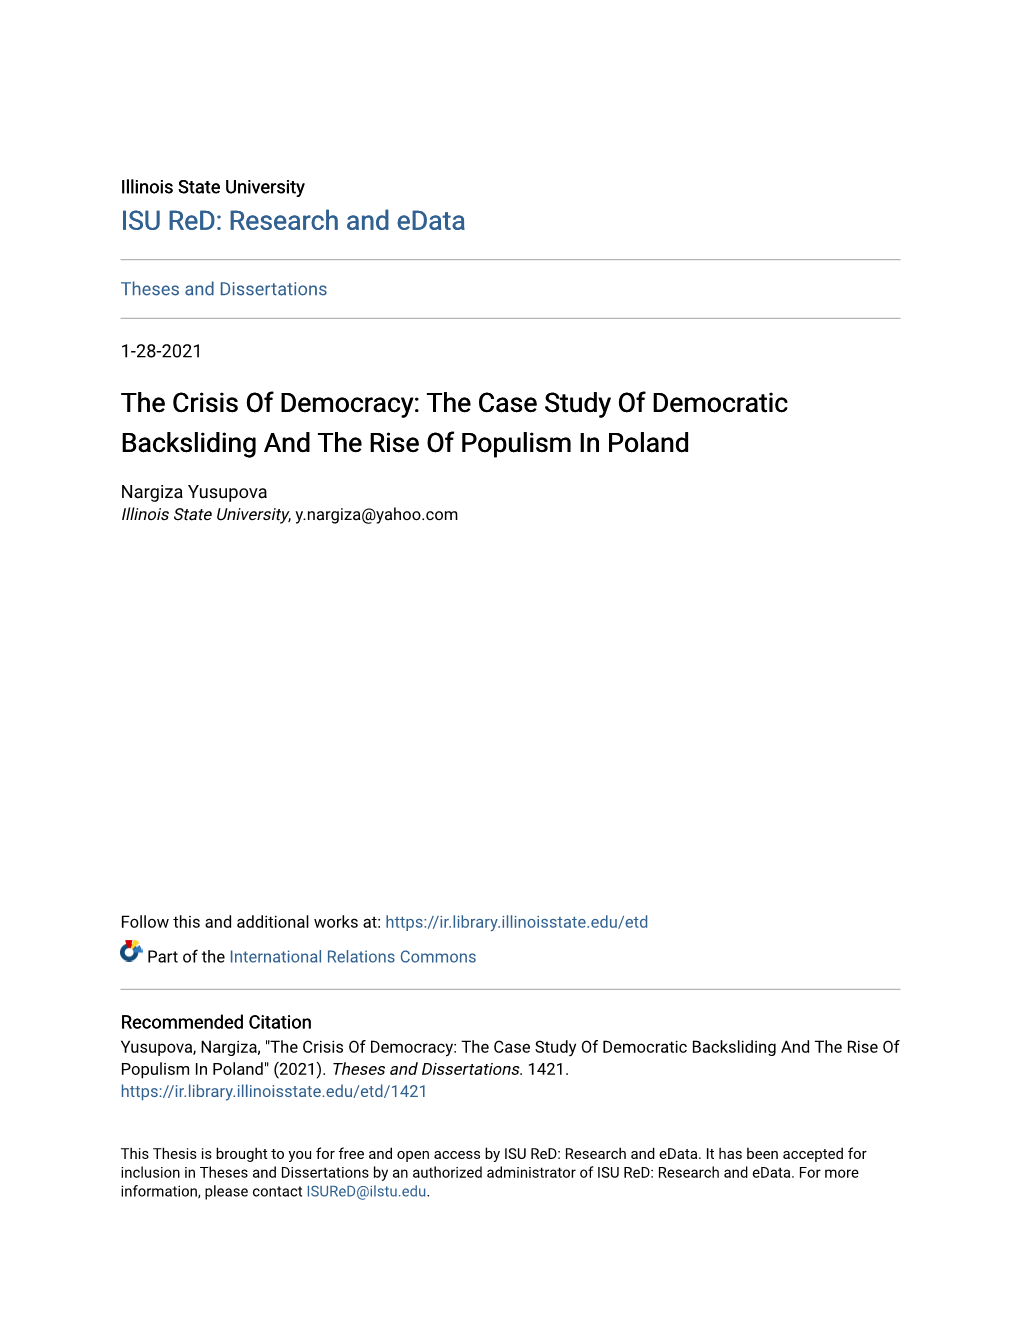 The Crisis of Democracy: the Case Study of Democratic Backsliding and the Rise of Populism in Poland